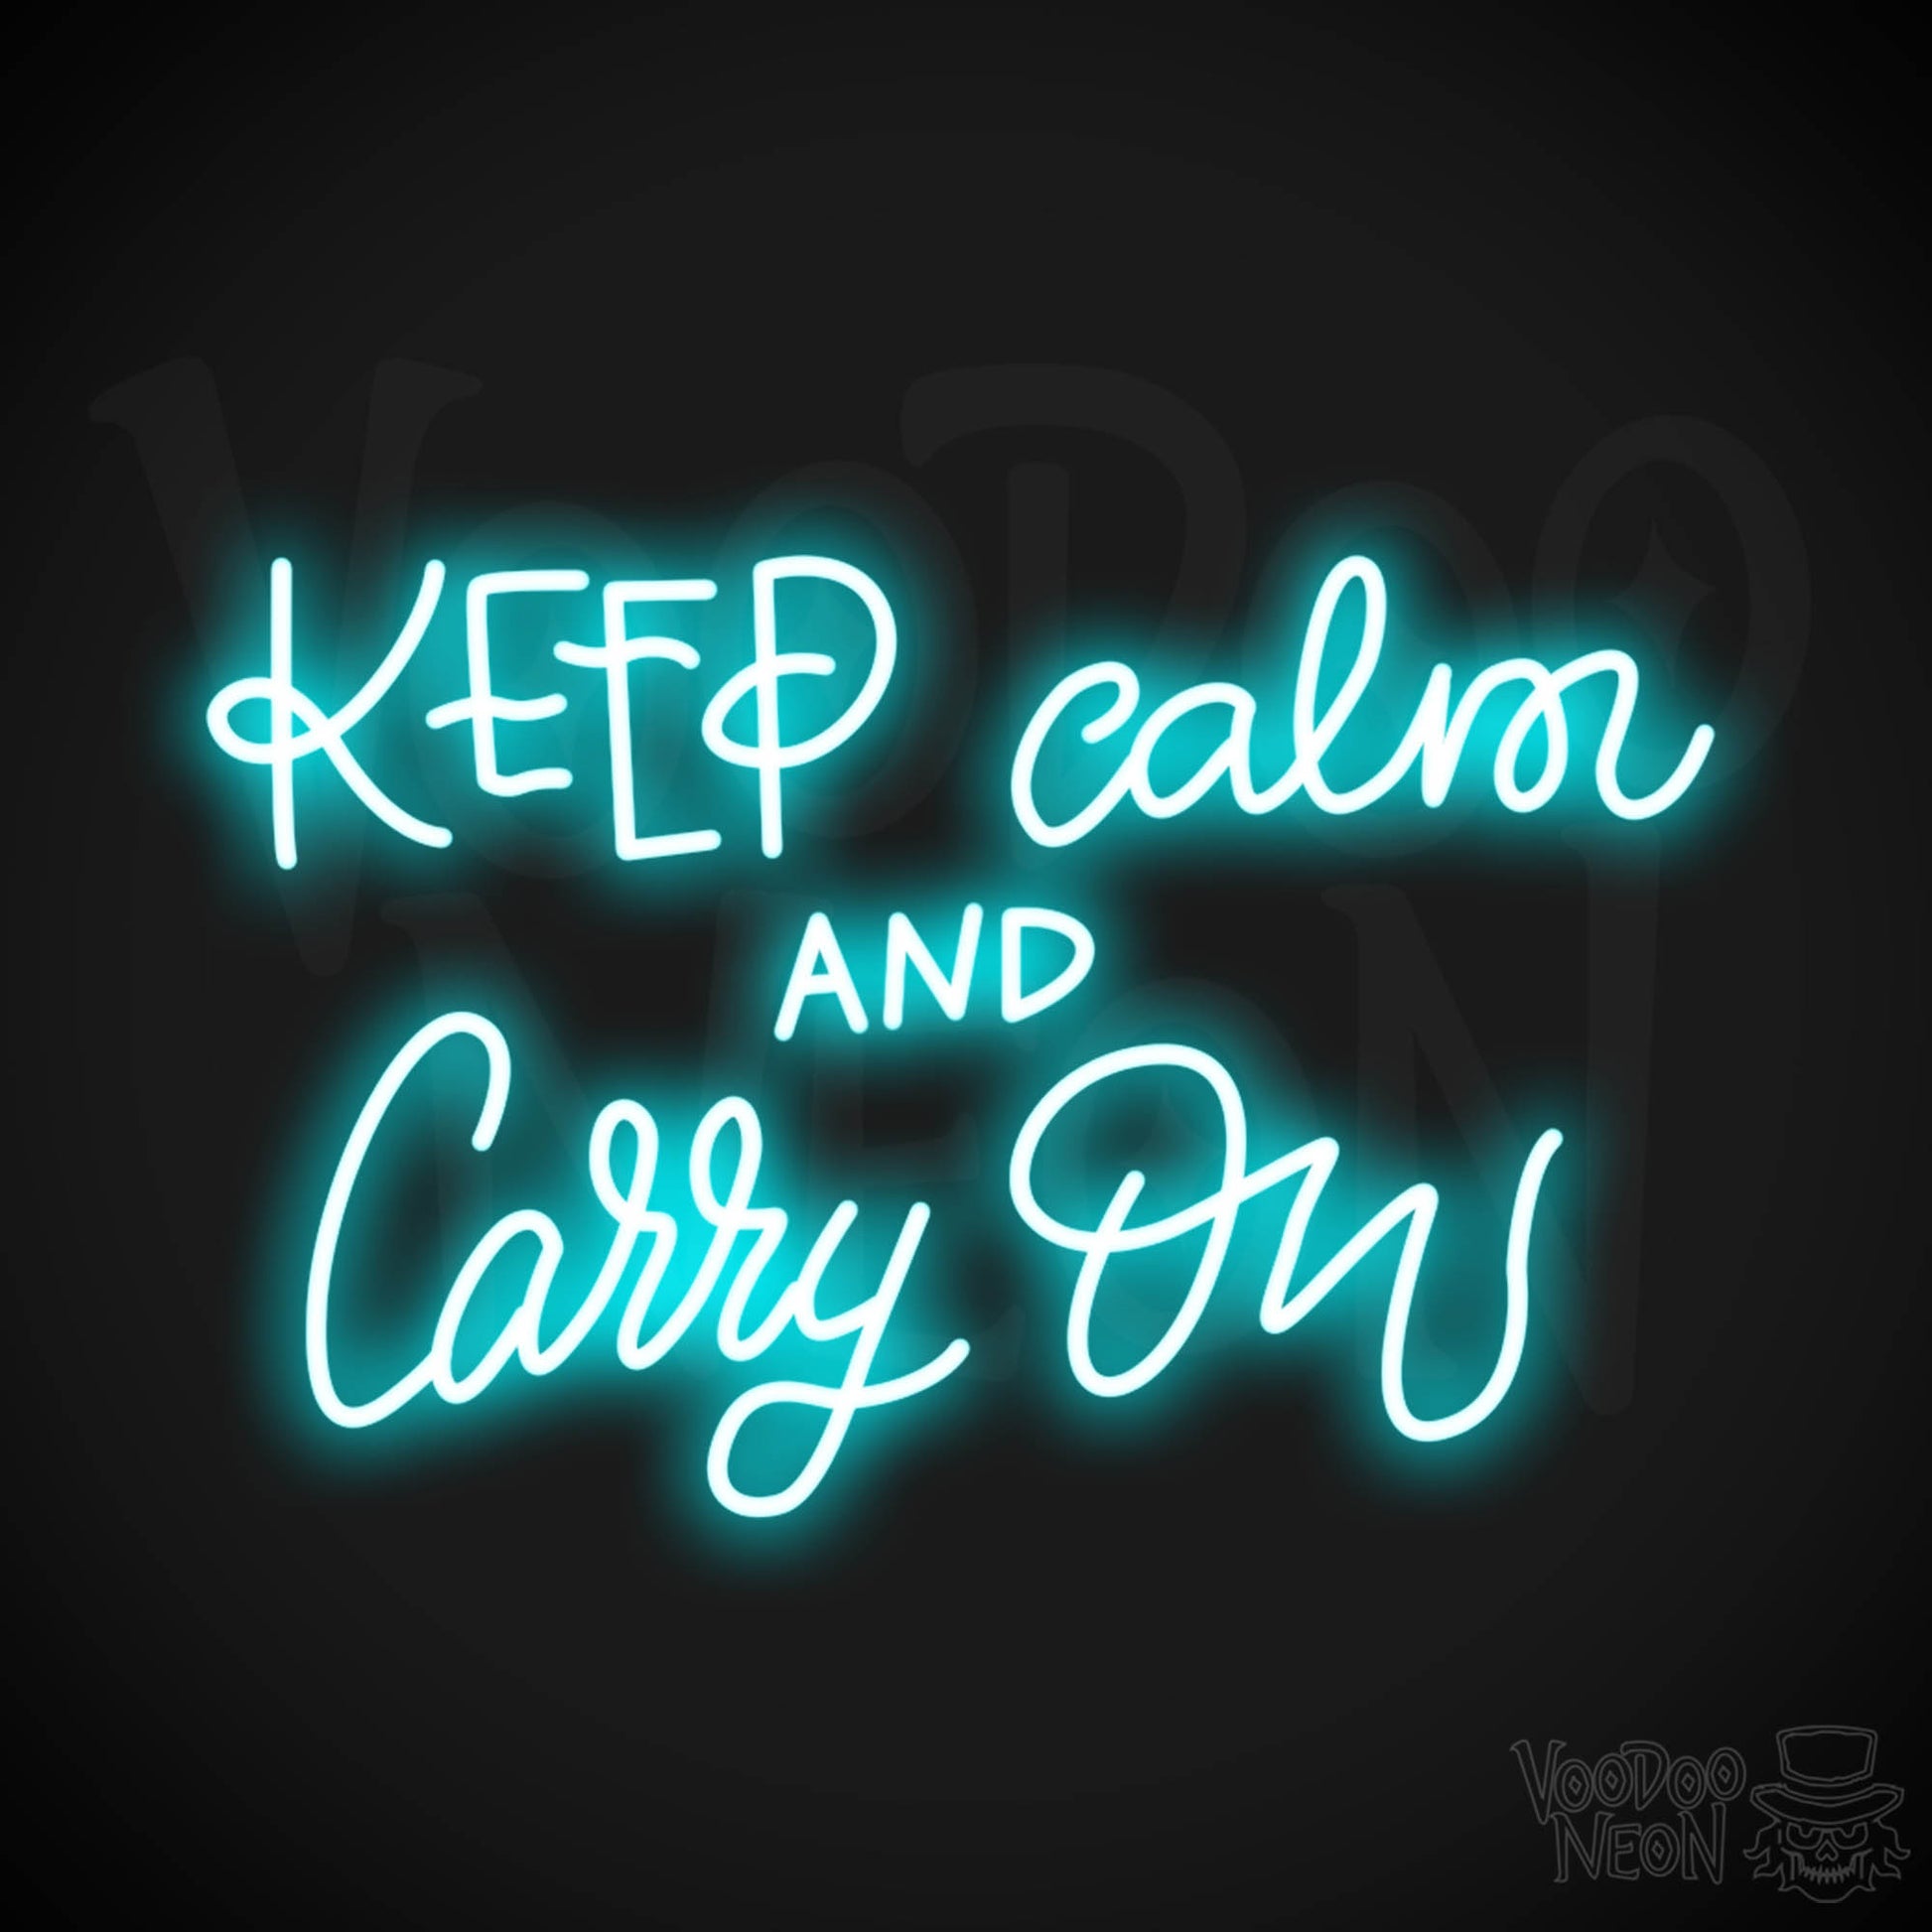 Keep Calm And Carry On Sign - Neon Sign - LED Wall Art - Color Ice Blue